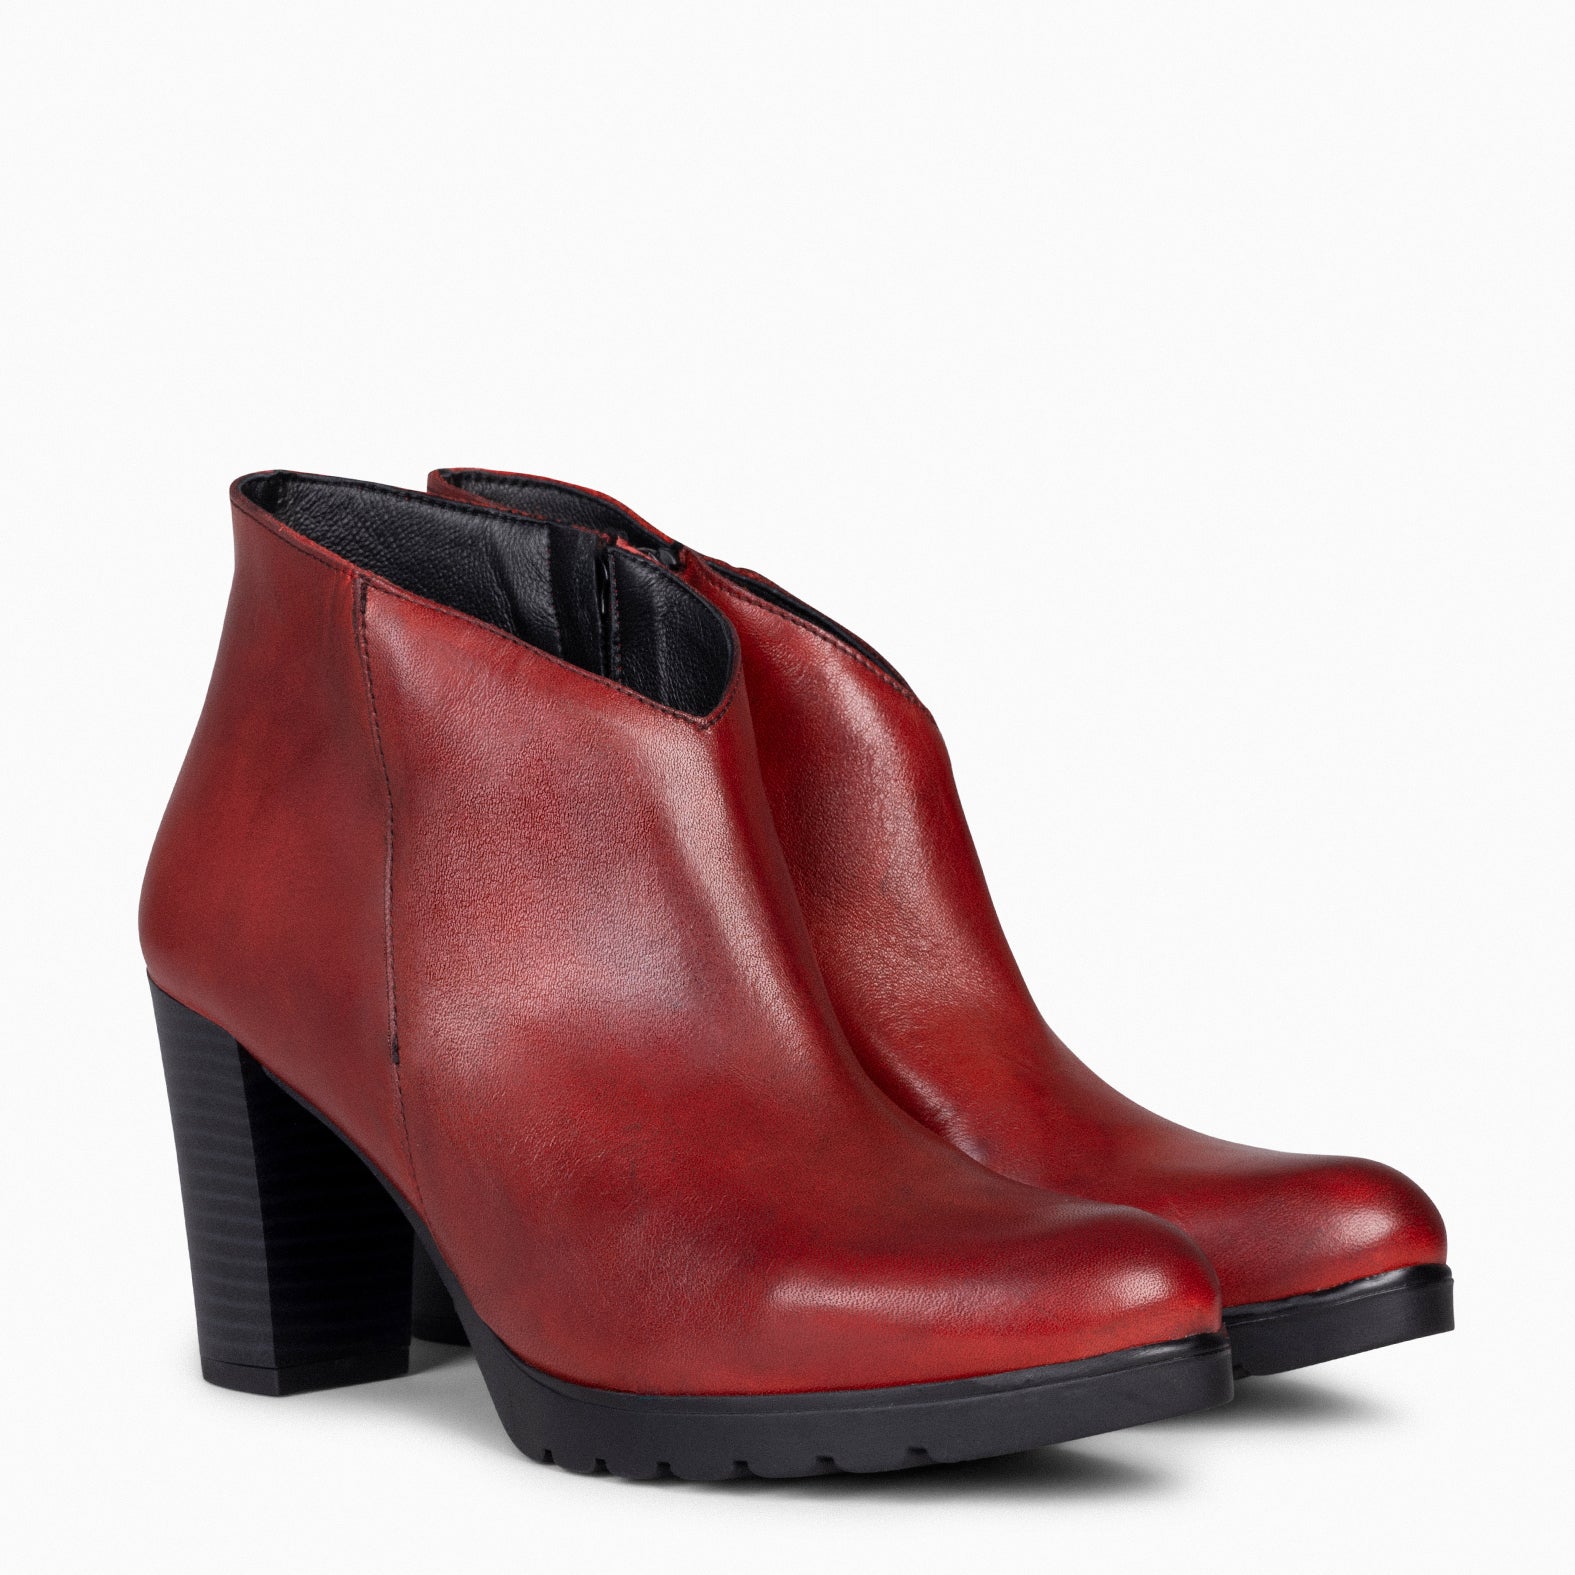 CLASSIC - BURGUNDY Women's Ankle Boots with heel